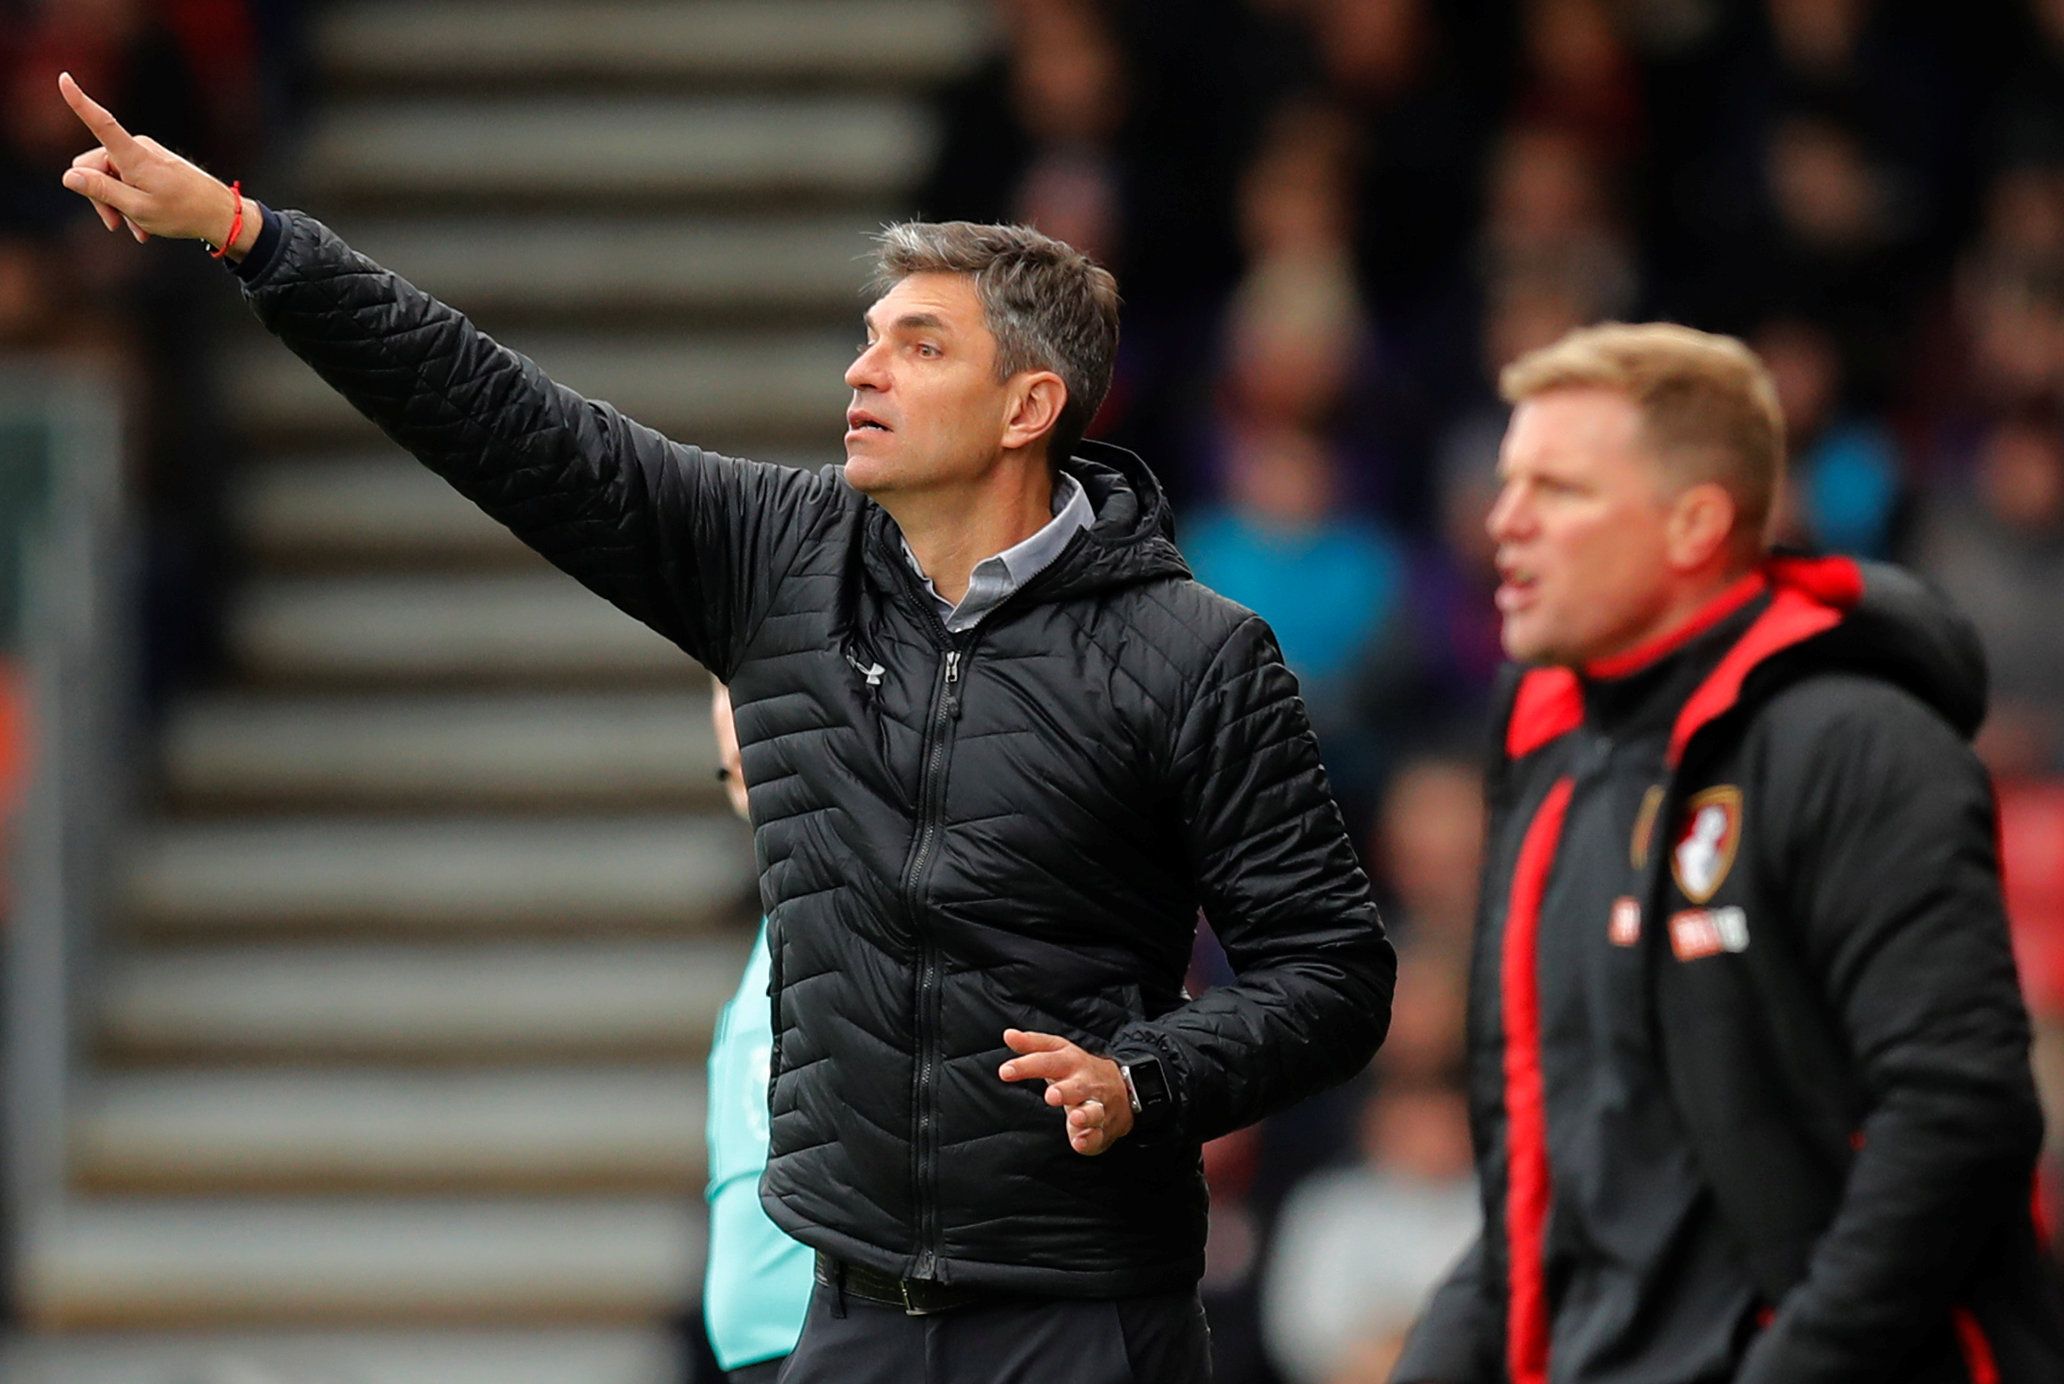 Soccer Football - Premier League - AFC Bournemouth vs Southampton - Vitality Stadium, Bournemouth, Britain - December 3, 2017   Southampton manager Mauricio Pellegrino and Bournemouth manager Eddie Howe    REUTERS/Eddie Keogh    EDITORIAL USE ONLY. No use with unauthorized audio, video, data, fixture lists, club/league logos or 